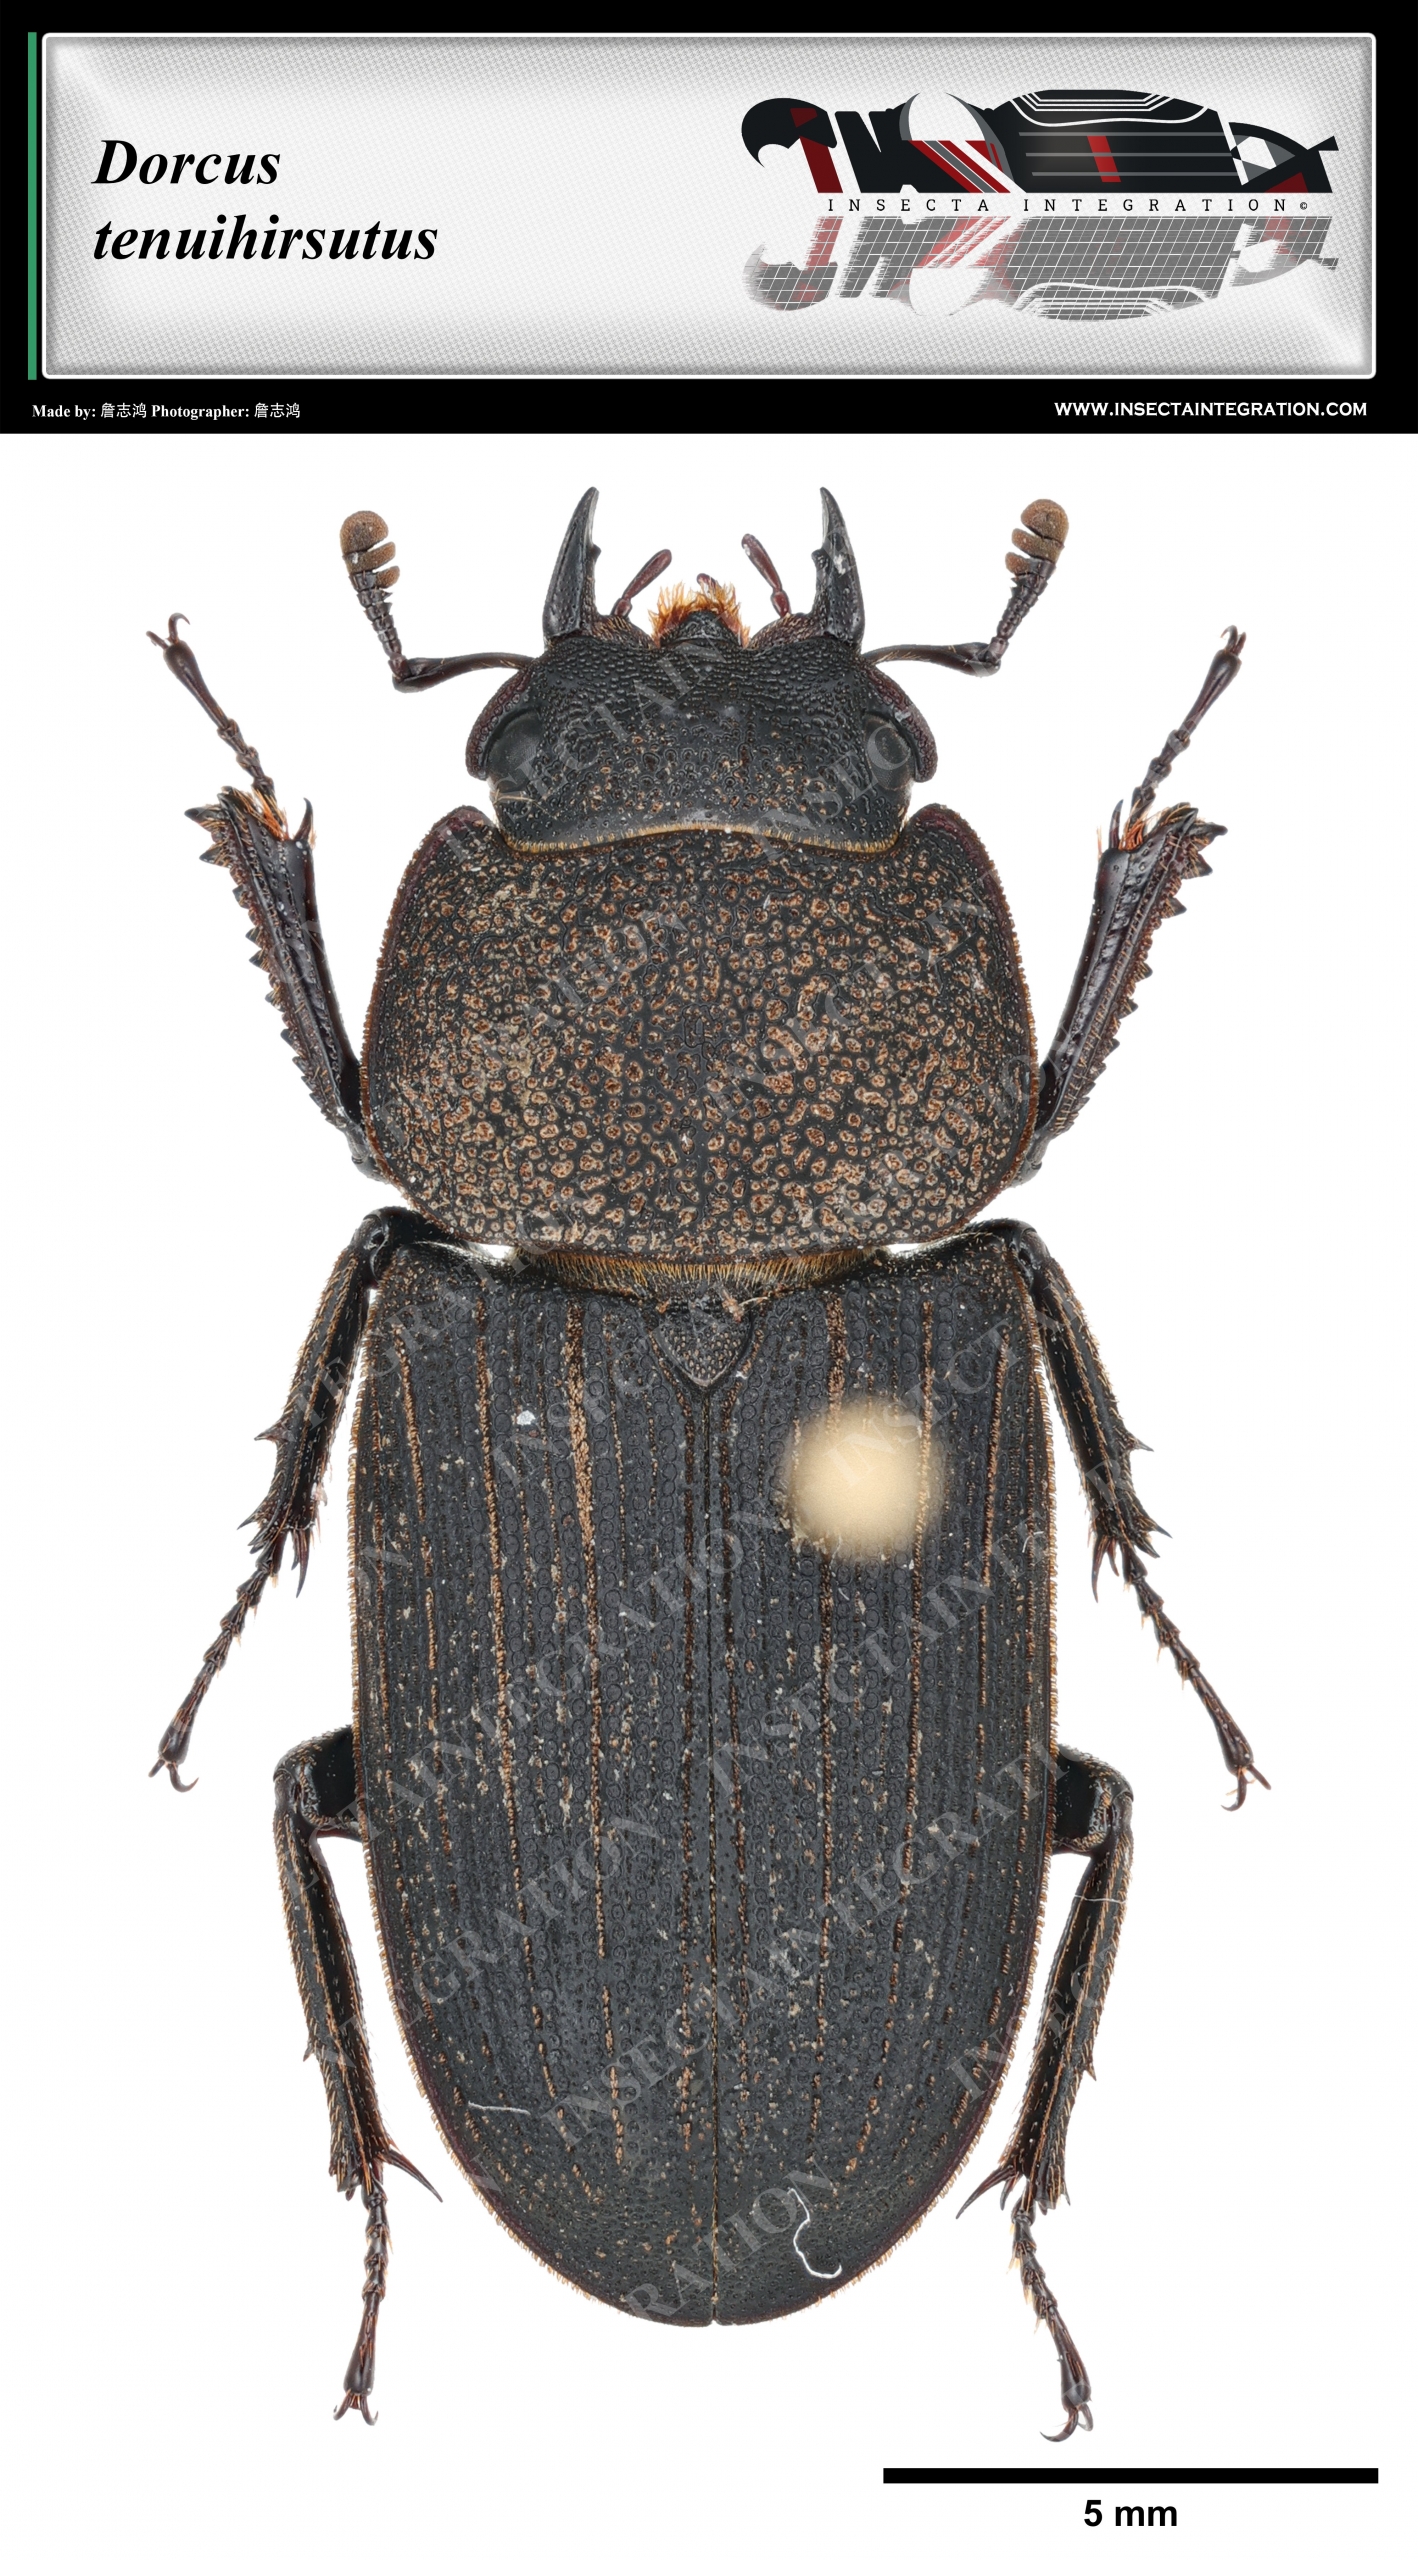 Read more about the article 北方锈刀锹甲 Dorcus tenuihirsutus